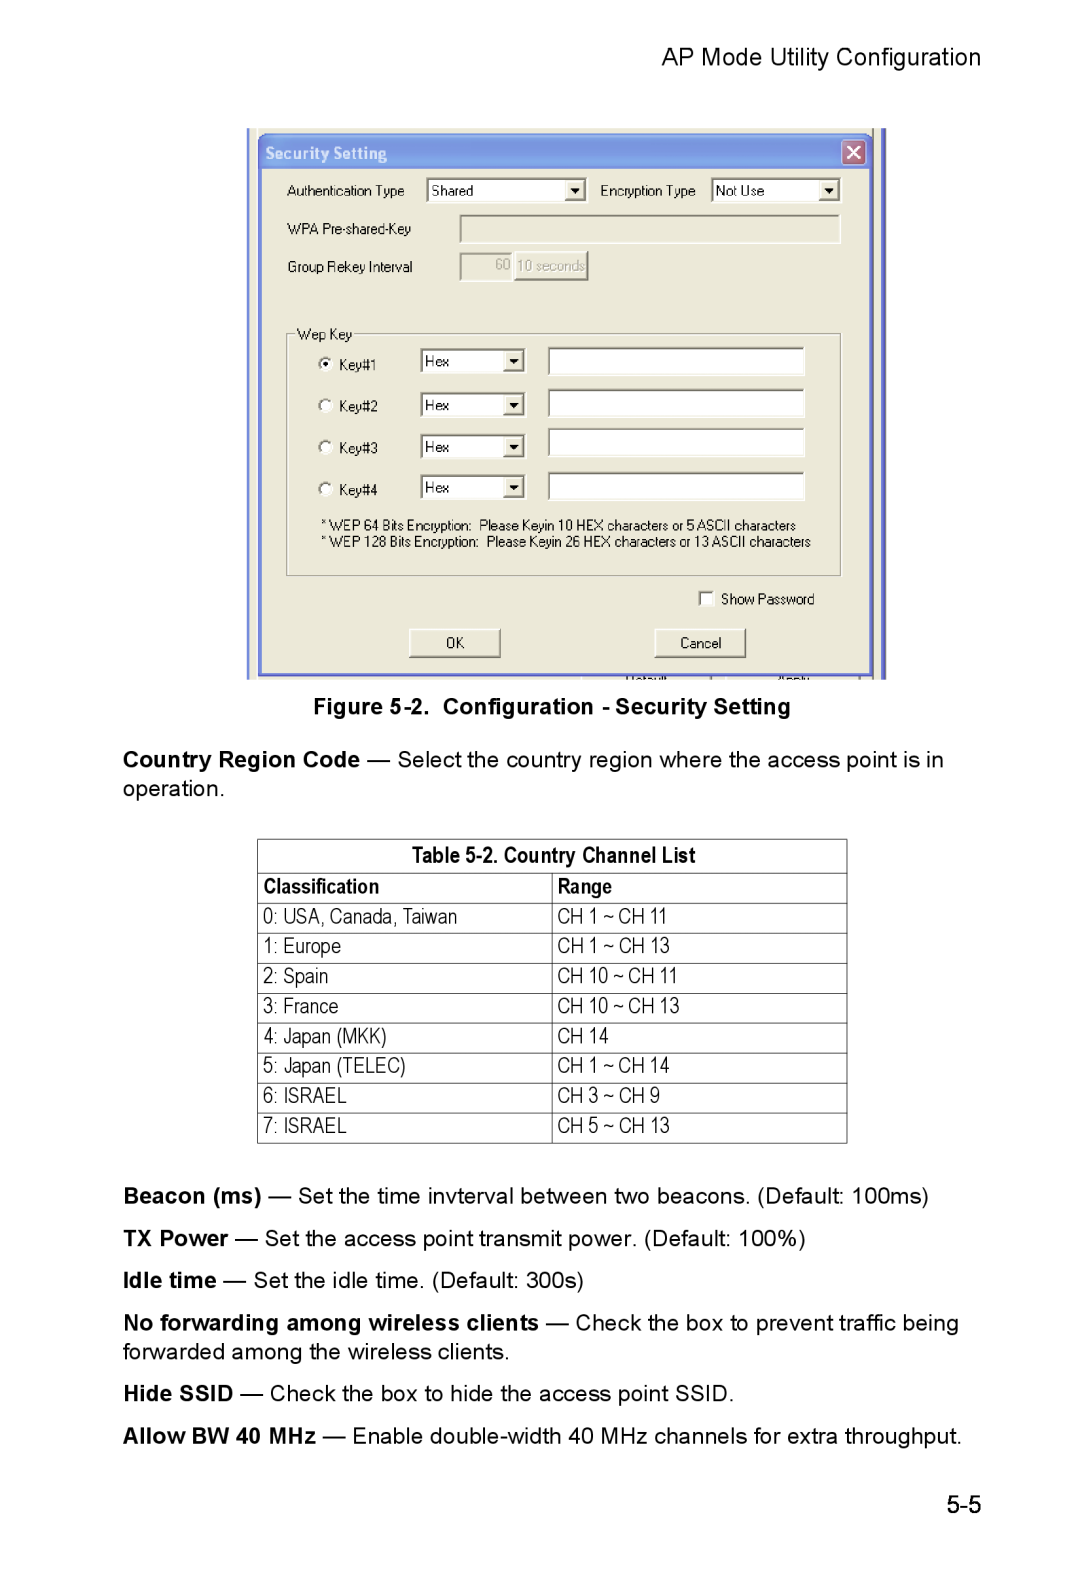 SMC Networks SMCWUSBS-N manual 2. Configuration - Security Setting, 2. Country Channel List, Classification, Range 